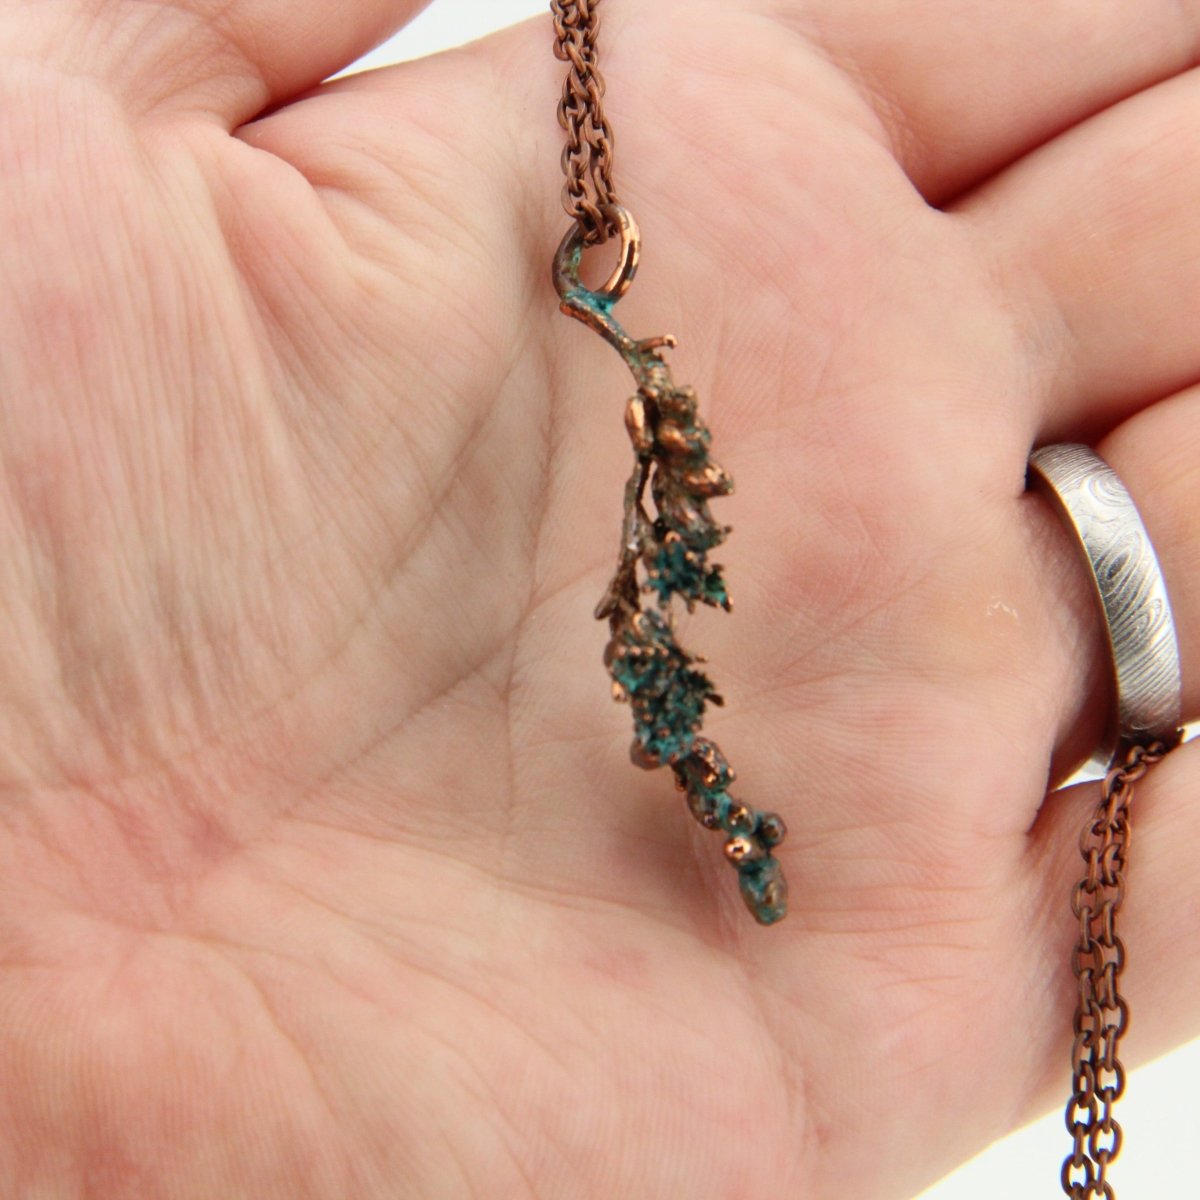 Real Plant Jewelry, Goldenrod Flower Sprig, Solidago rugosa, Copper Electroformed Pendant with Antique Patina, Gift for Nature Lover